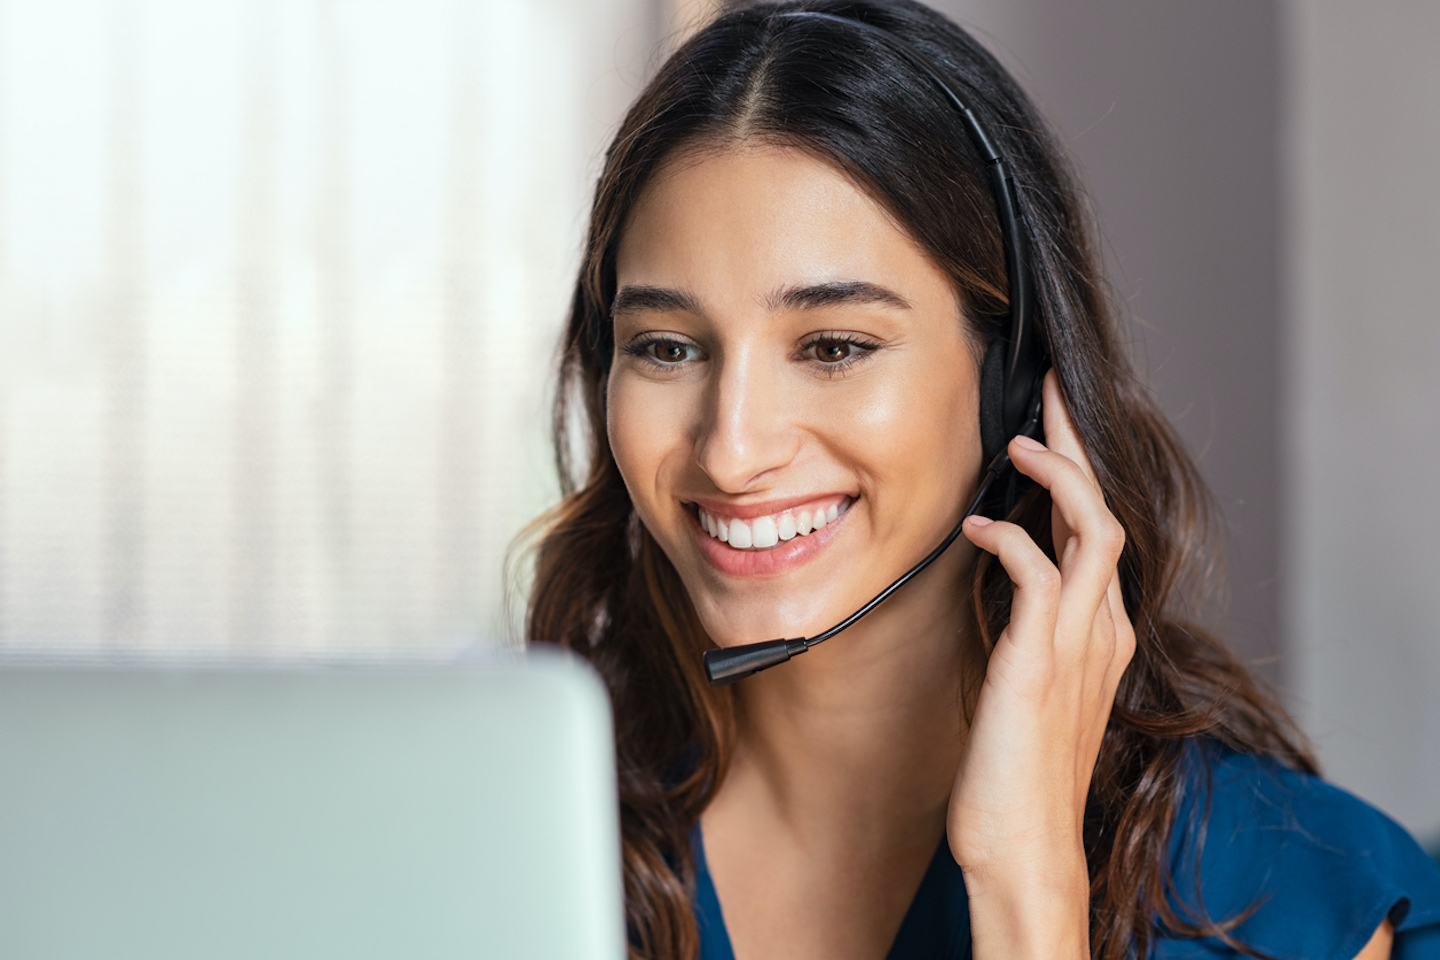 How to Get the Most From Your Phone Answering Service